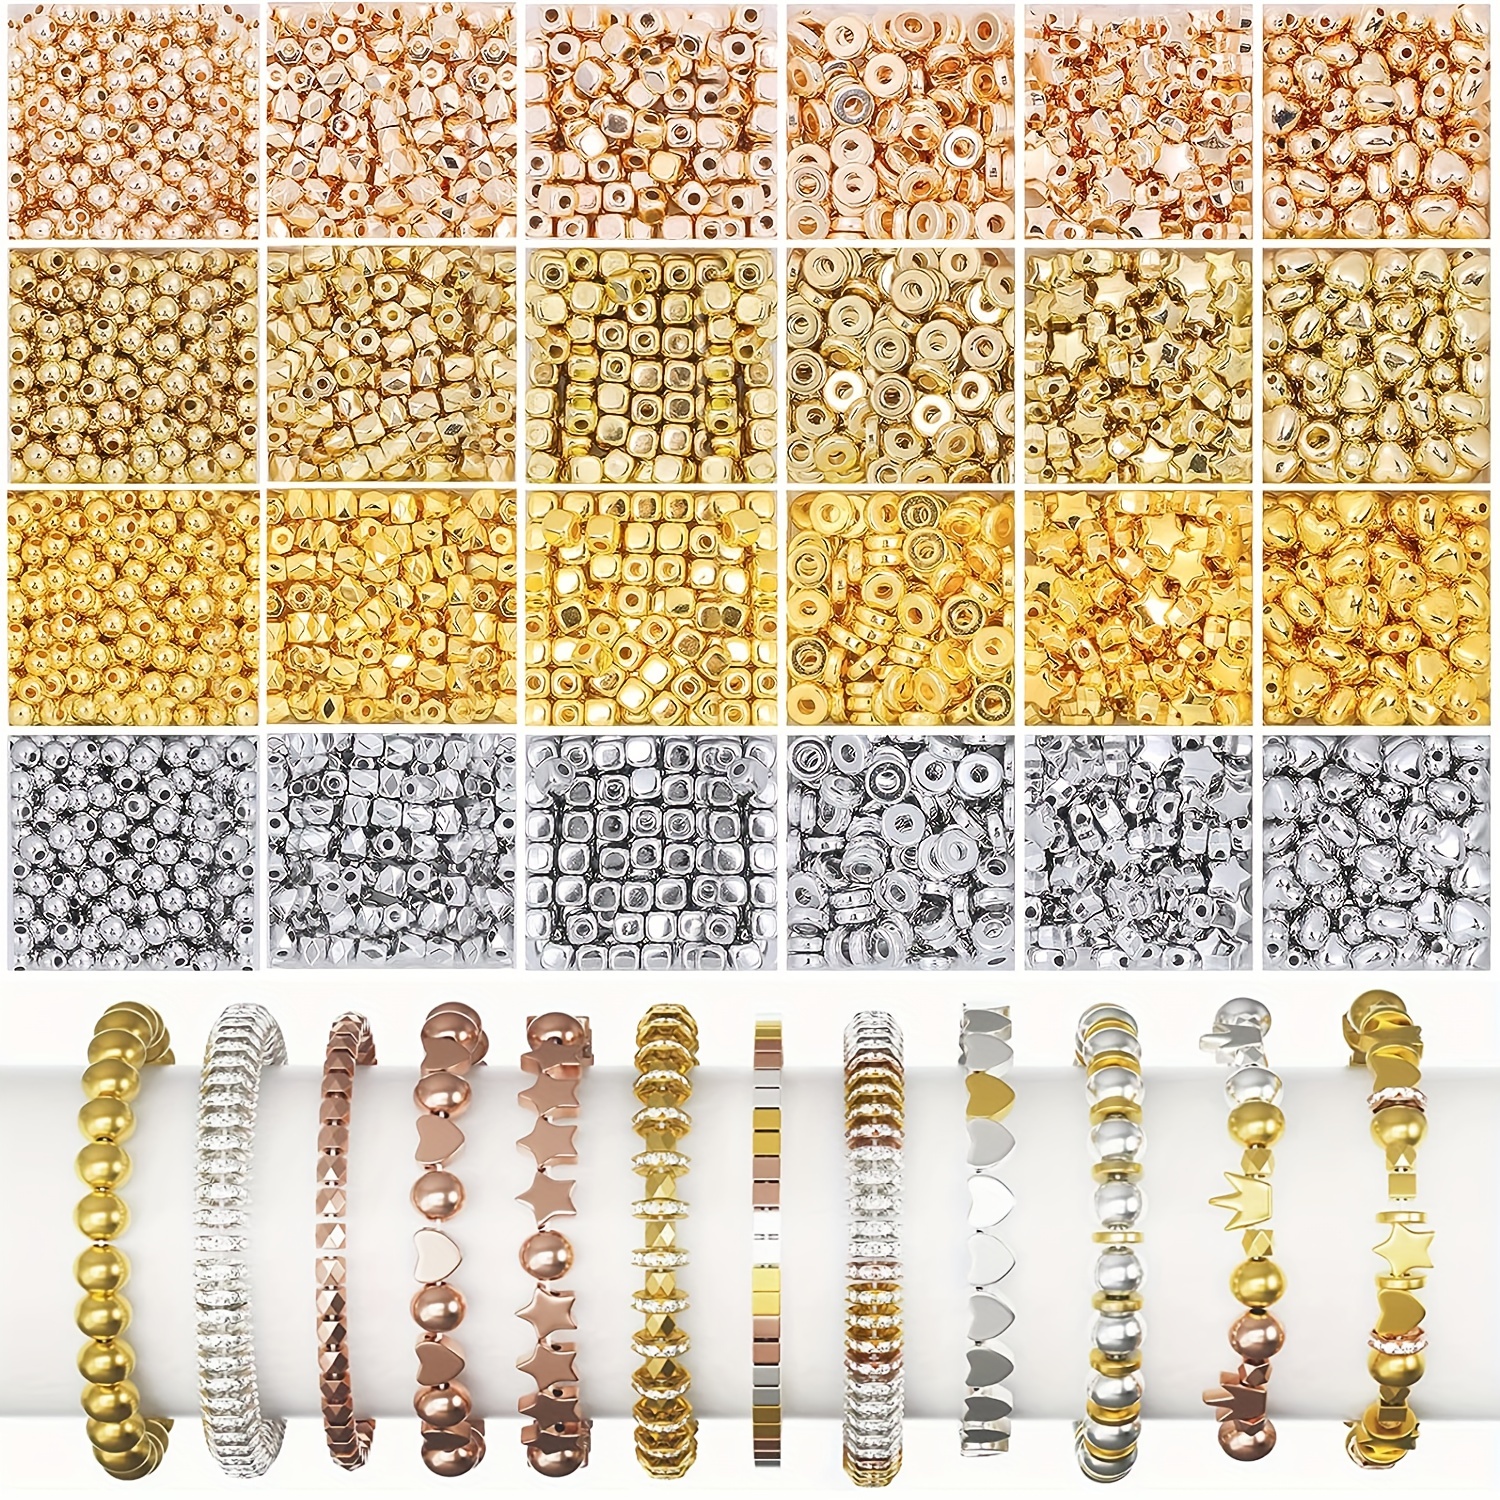 300pcs Decorative Bracelet Making Supplies, Necklace Diy Handmade Craft  Material Package, Small Golden Beads, Diy Jewelry Handmade Beading  Accessories